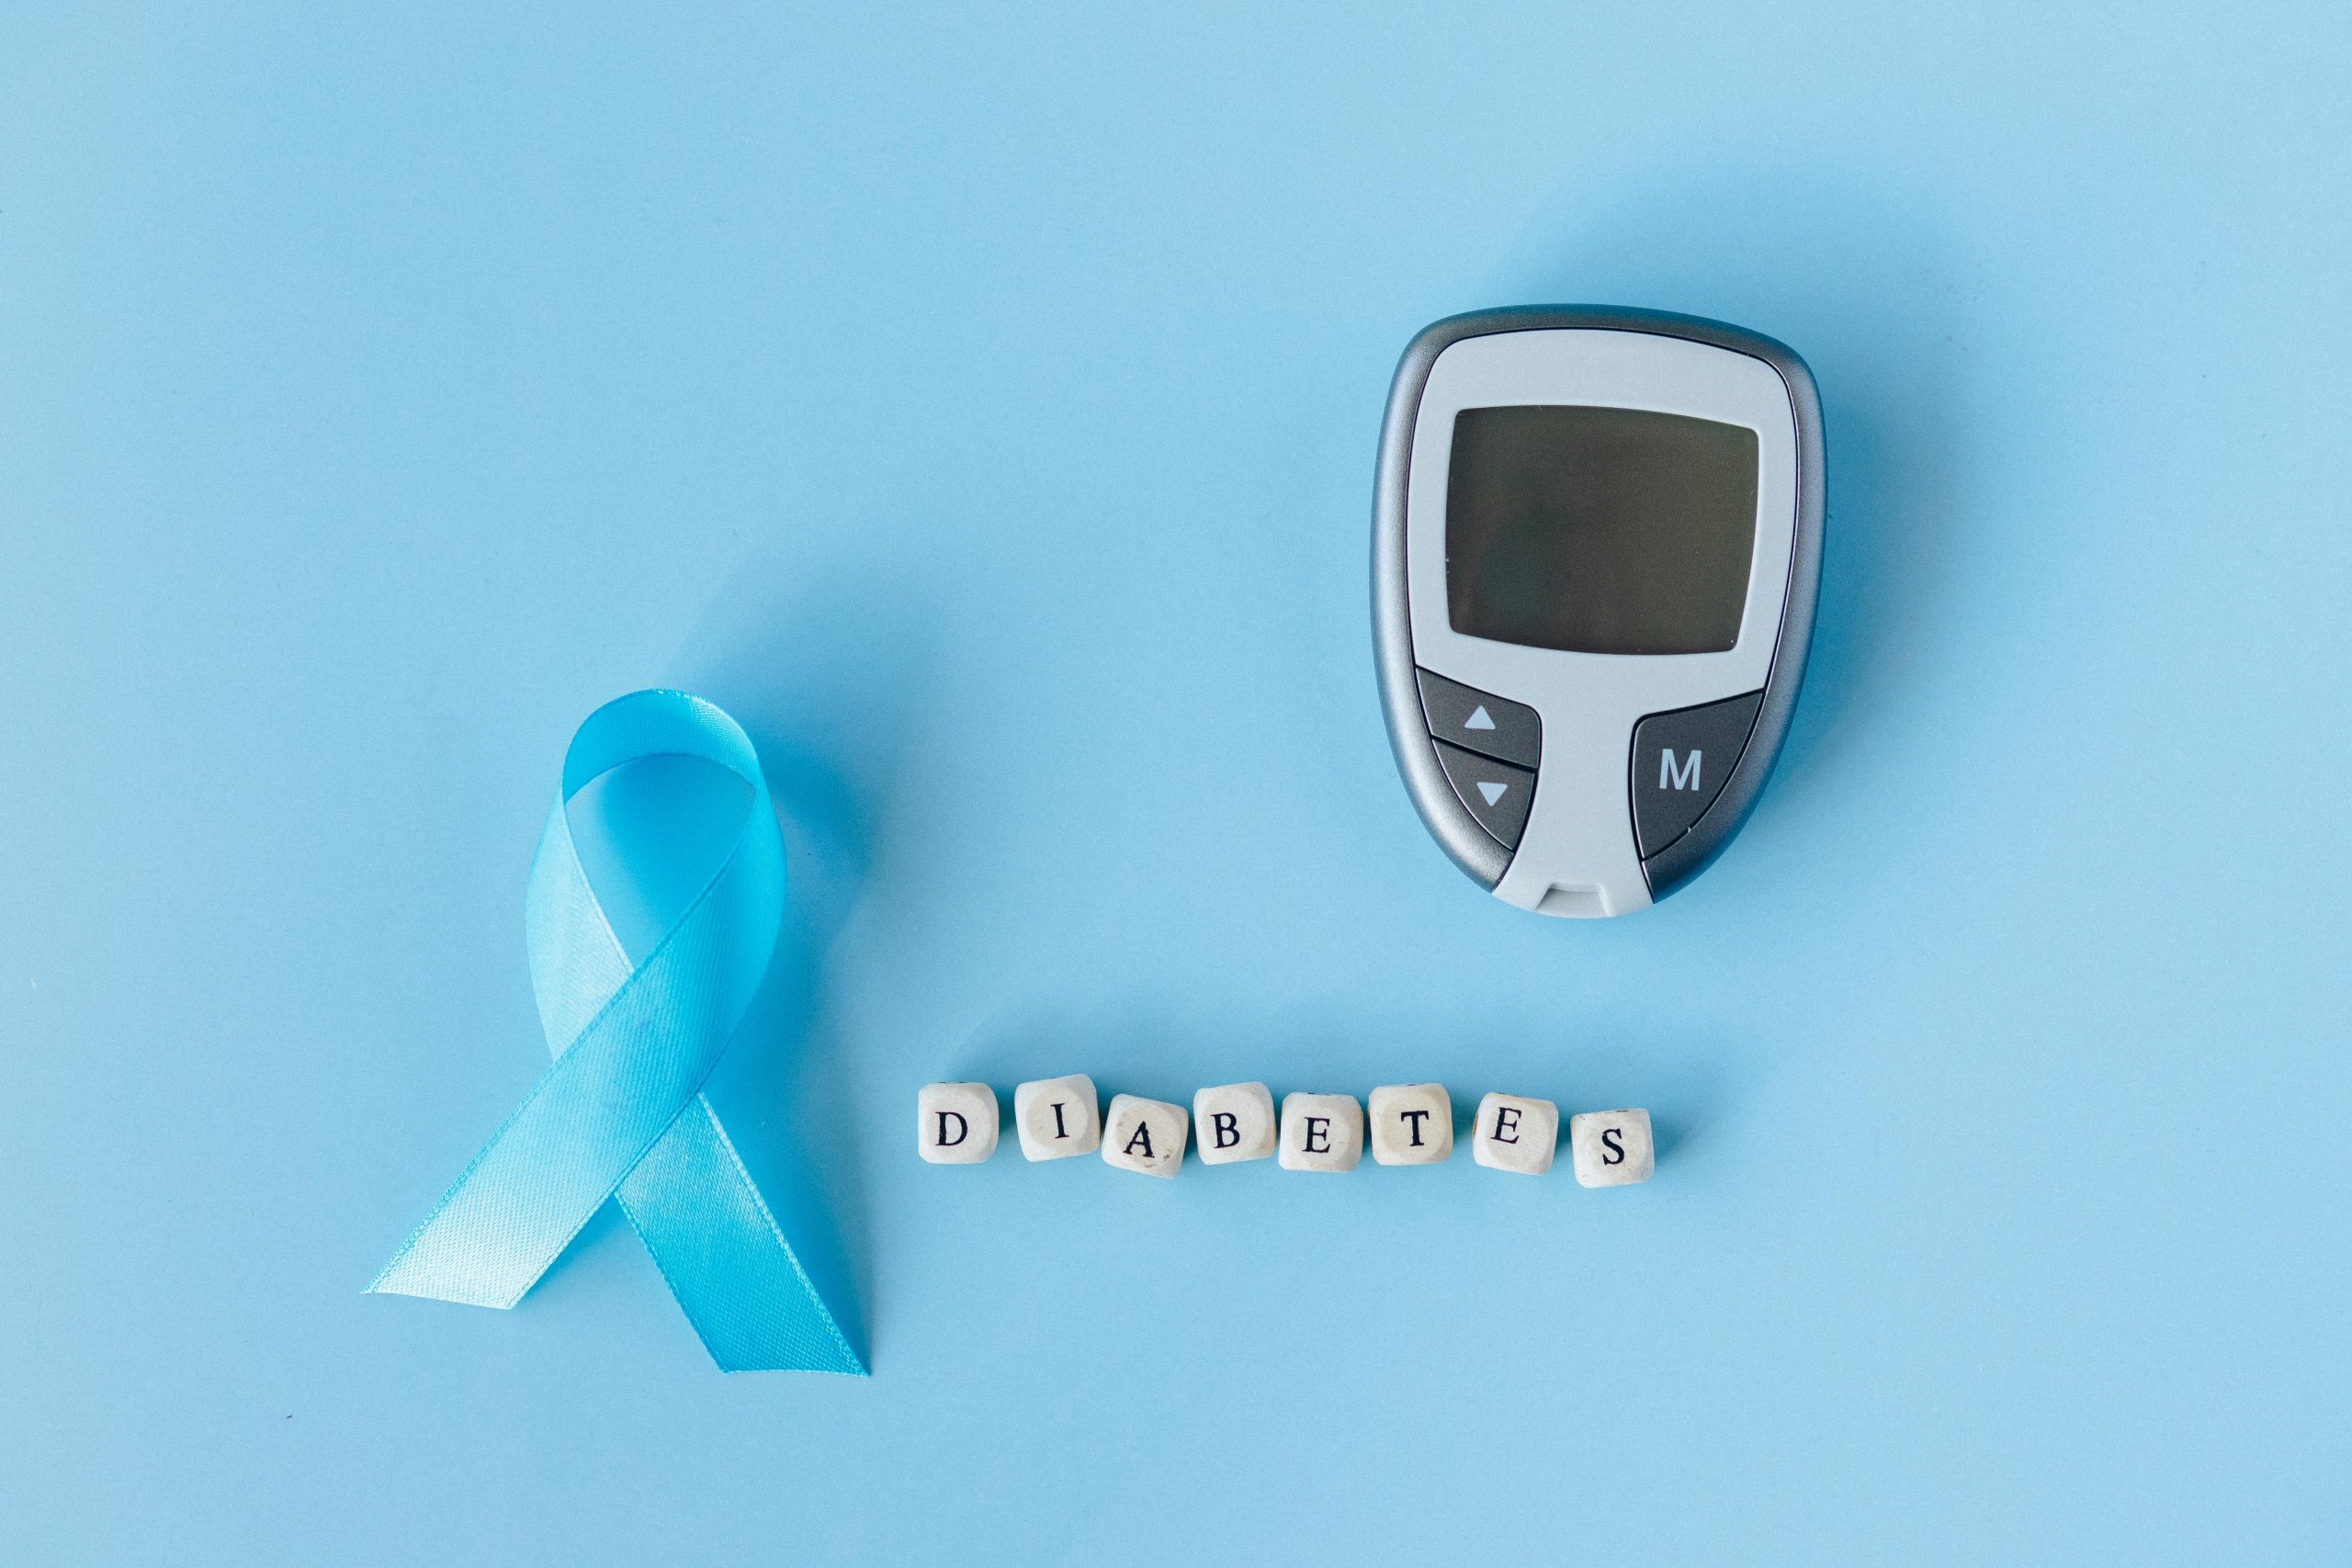 Risk of Cancer Four Times Higher in People with Diabetes, Finds University of Pcs [Video]